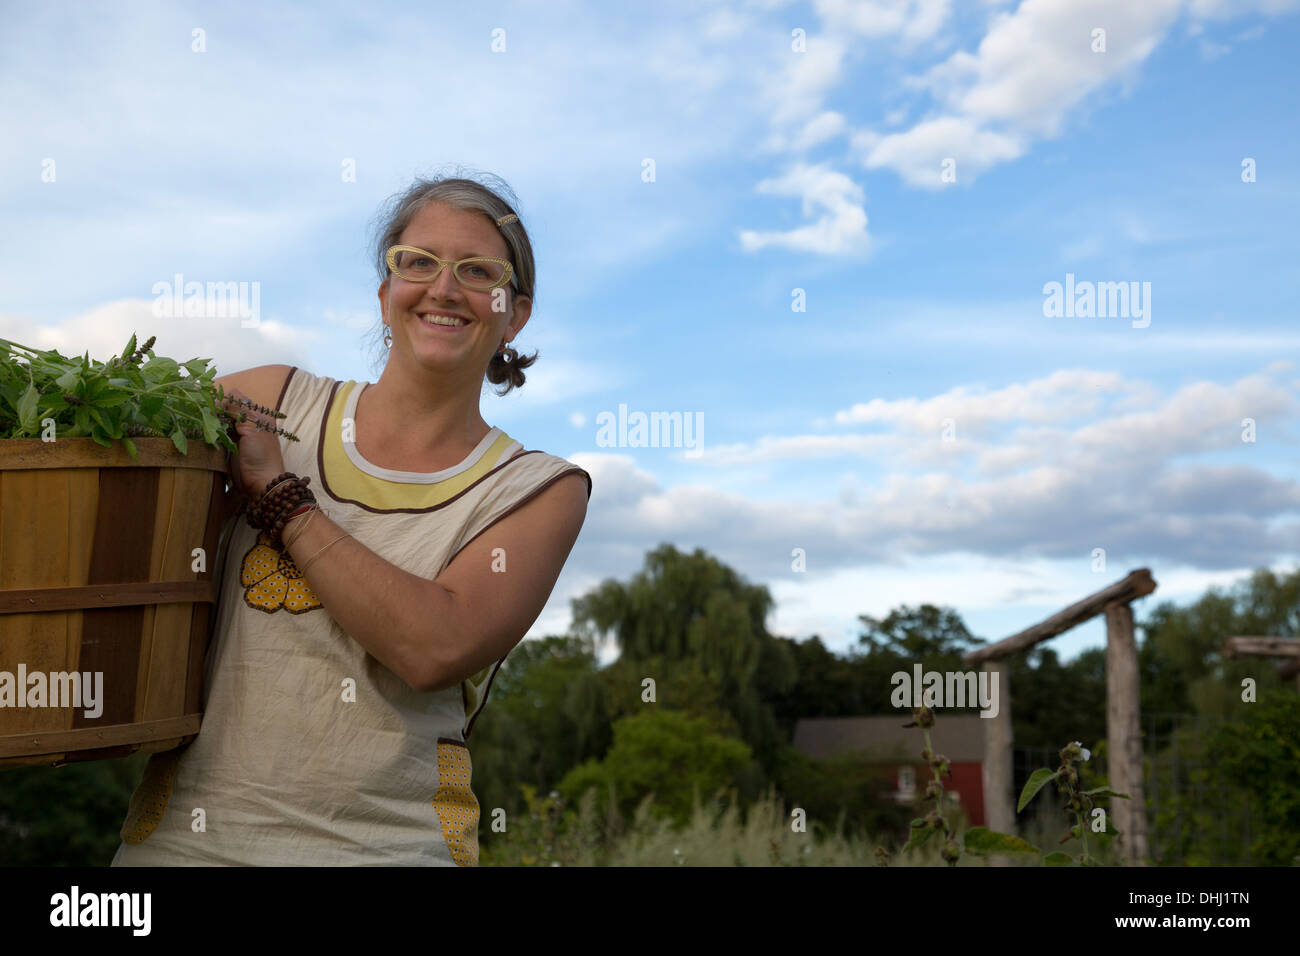 Portrait of woman working on herb farm Banque D'Images